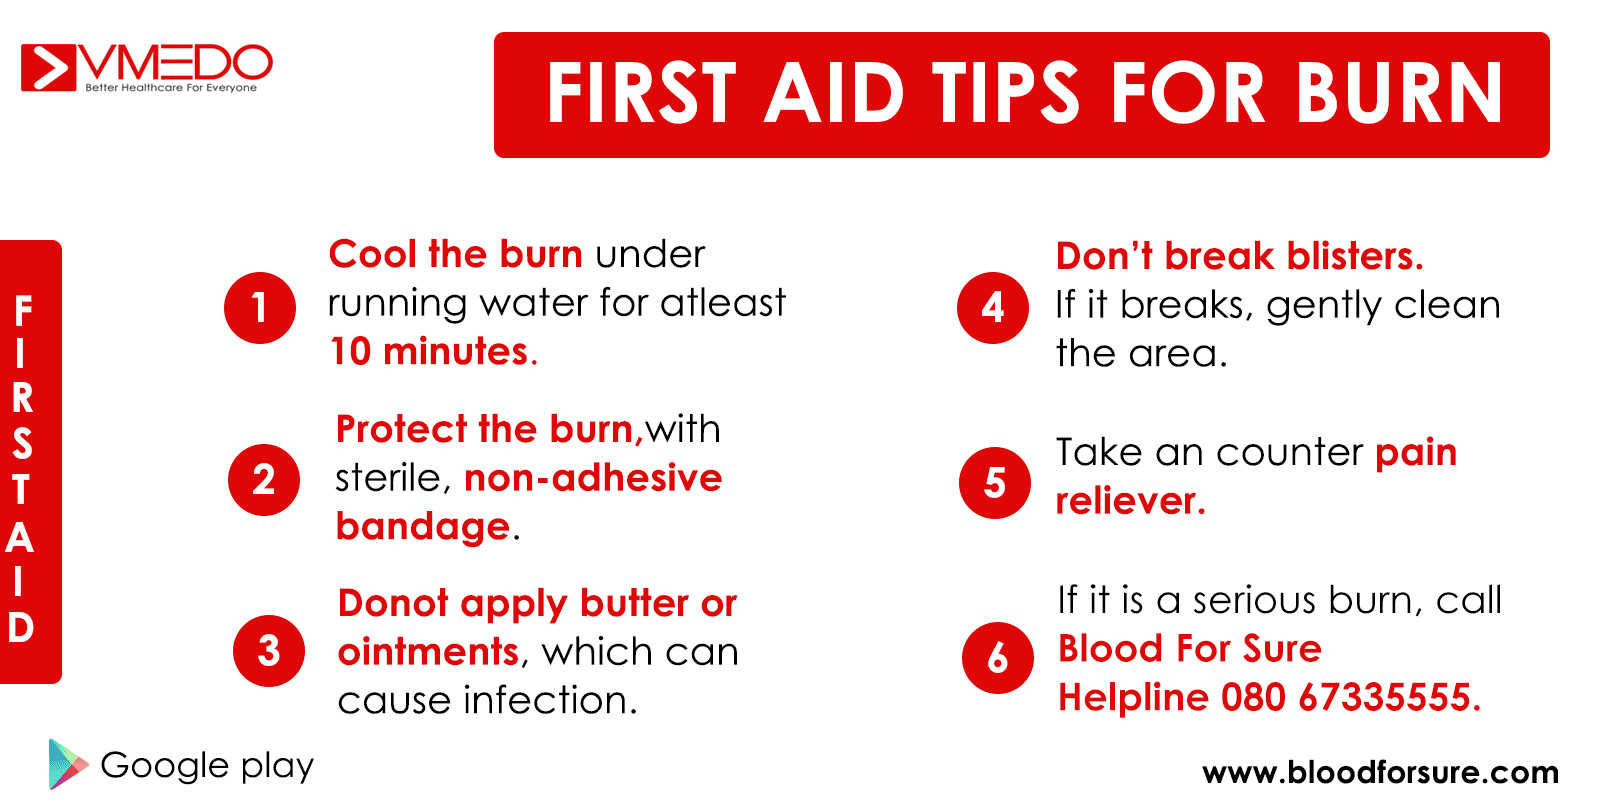 First aid for burn